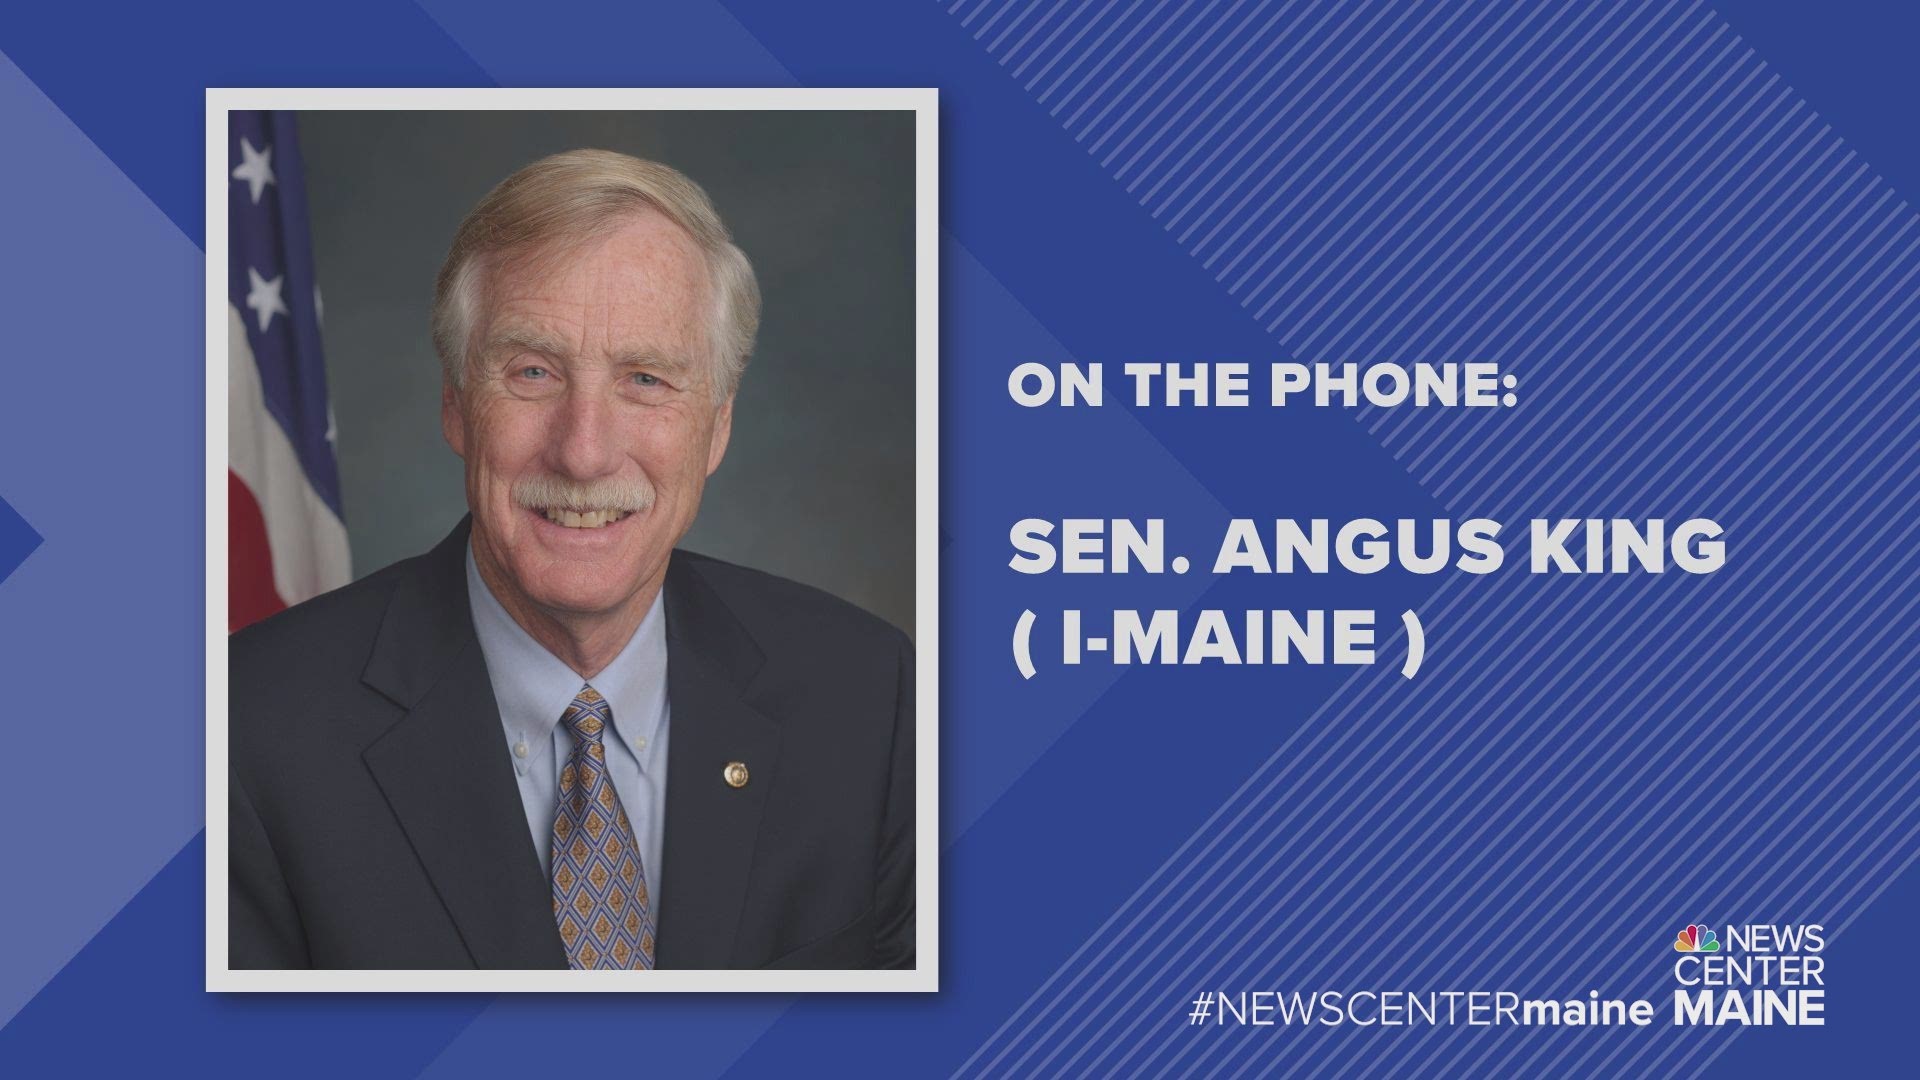 Sen. Angus King returned from a trip to the McAllen border detention facility in Texas Friday evening.